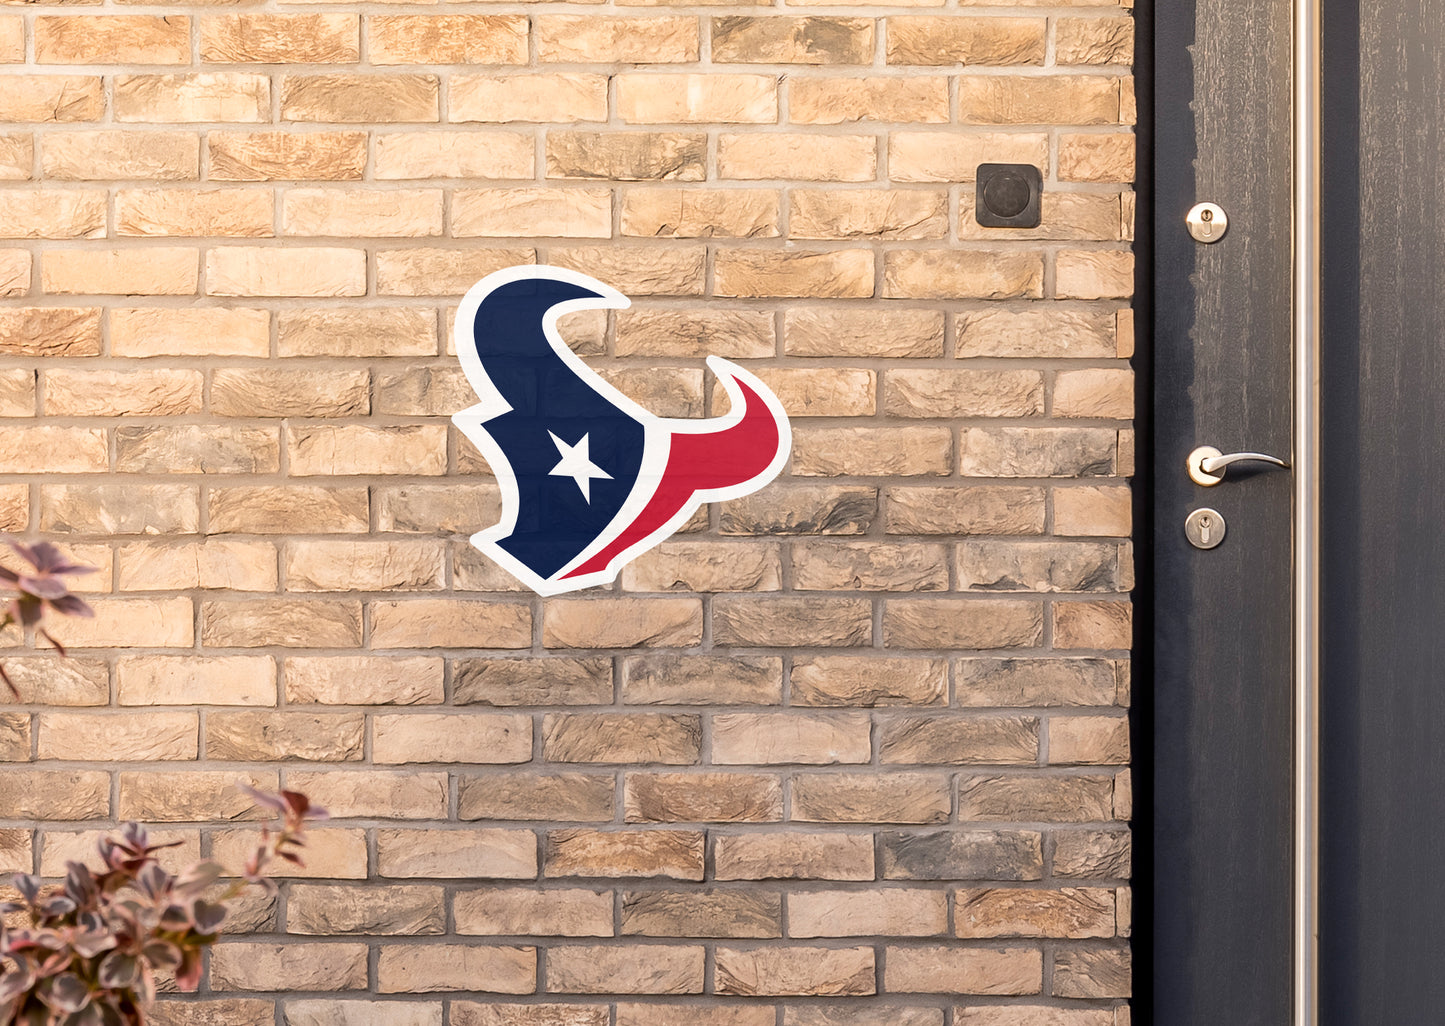 Houston Texans:  Alumigraphic Logo        - Officially Licensed NFL    Outdoor Graphic